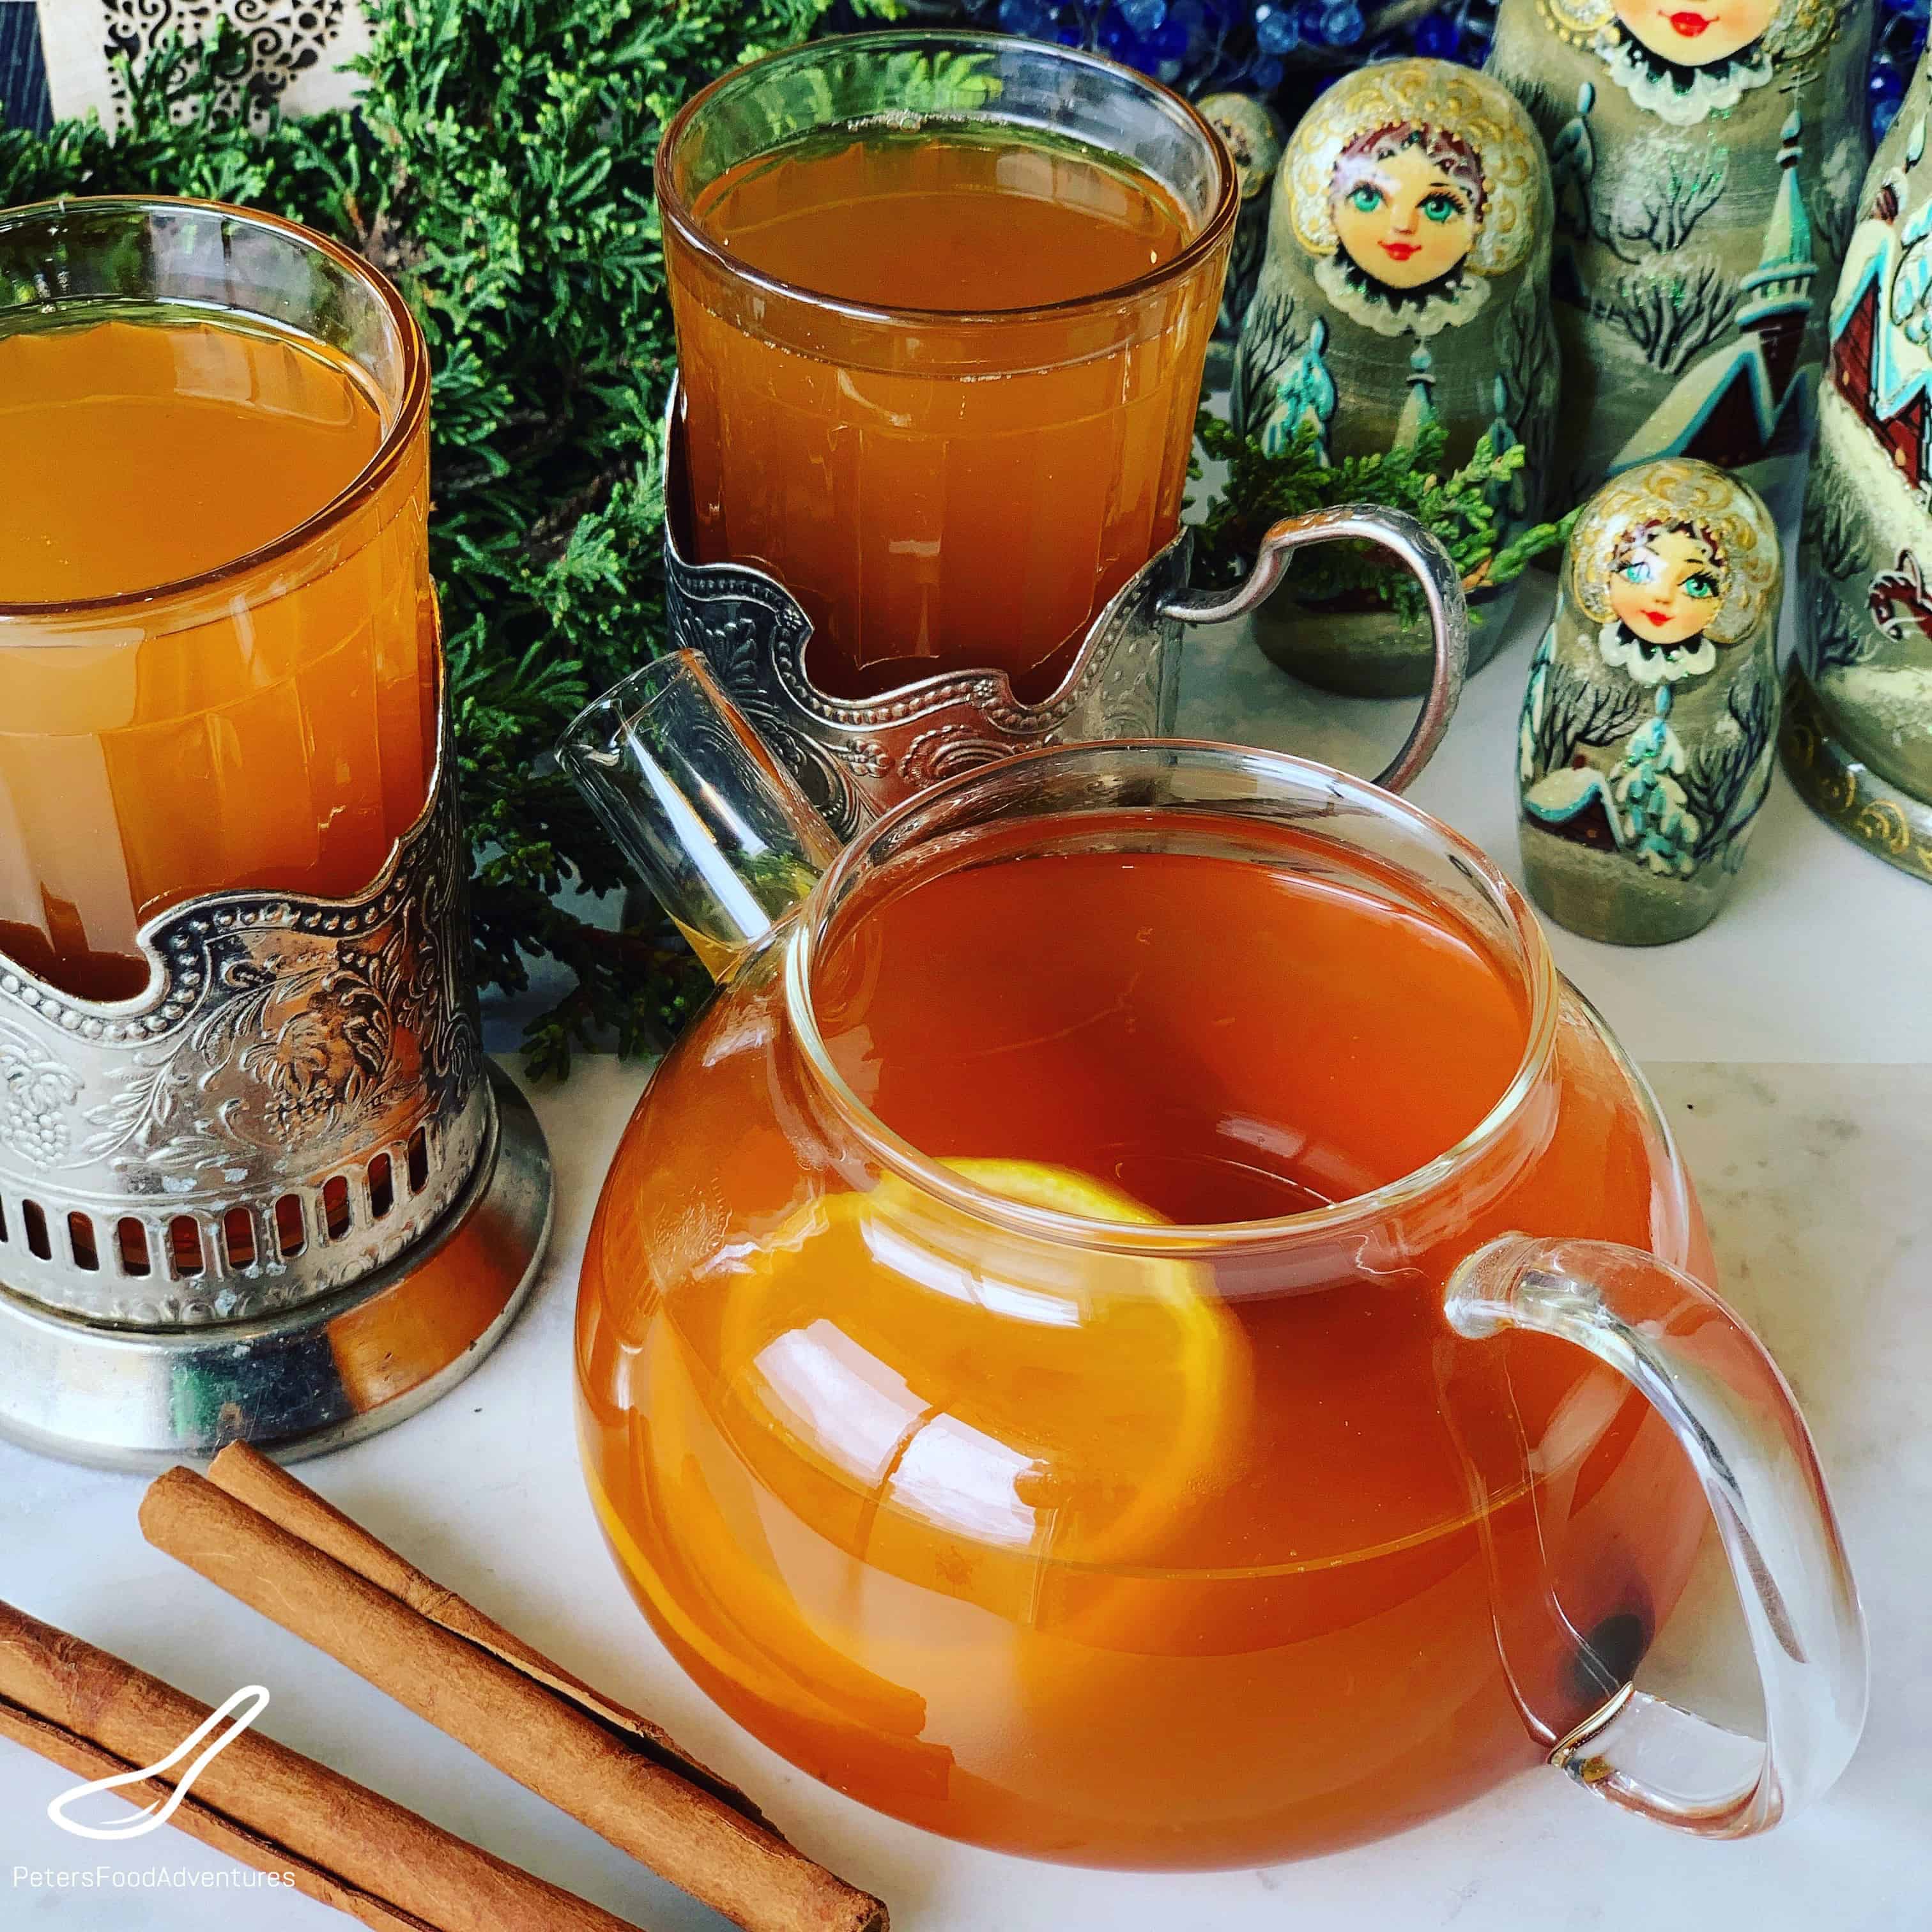 russian-tea-made-from-scratch-video-peter-s-food-adventures